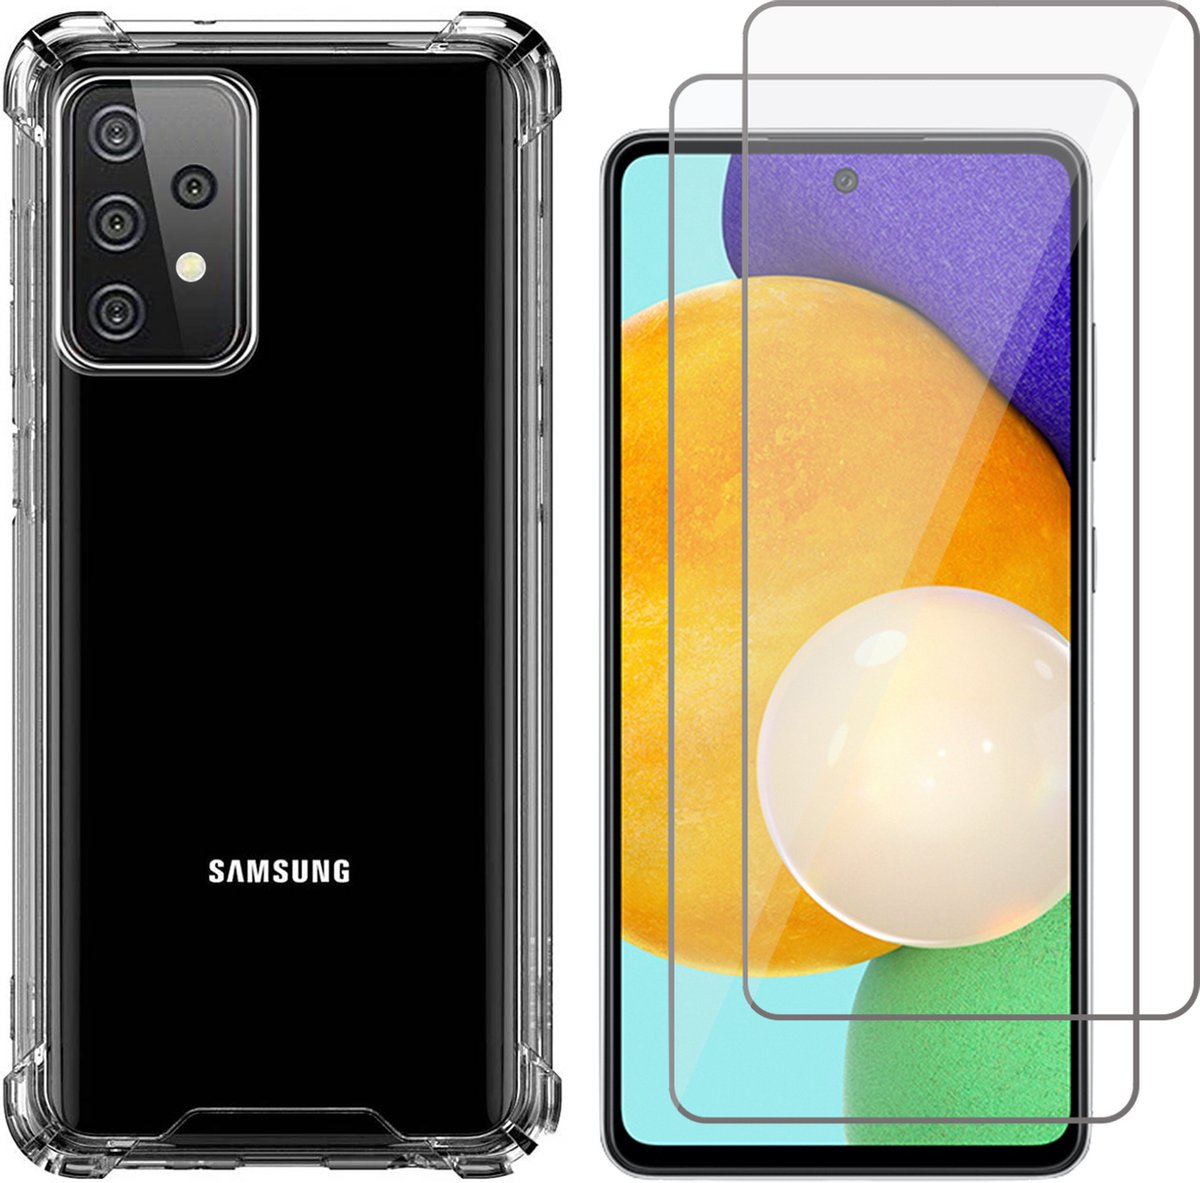 Hoesje geschikt voor Samsung Galaxy A72 Back Cover Anti Shock Siliconen Case Transparant Hoes - 2x Screenprotector Gehard Glas Beschermglas Tempered Glass Screen Protector